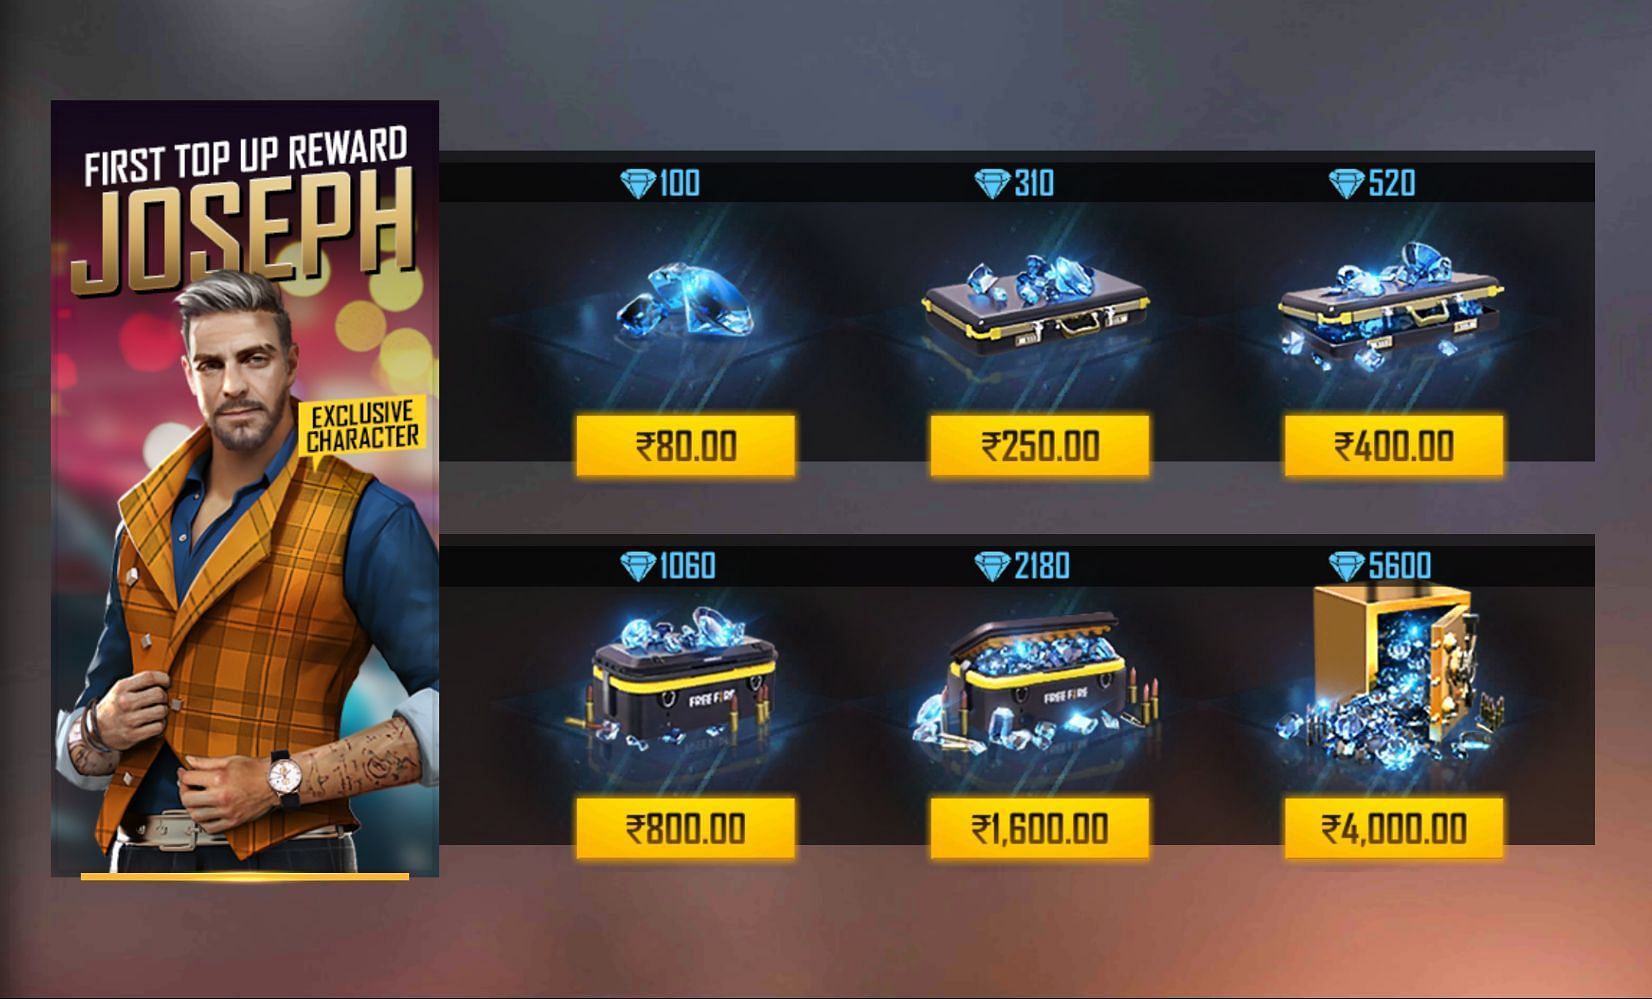 With this event, the top up worth 800 will give the most value (Image via Free Fire)